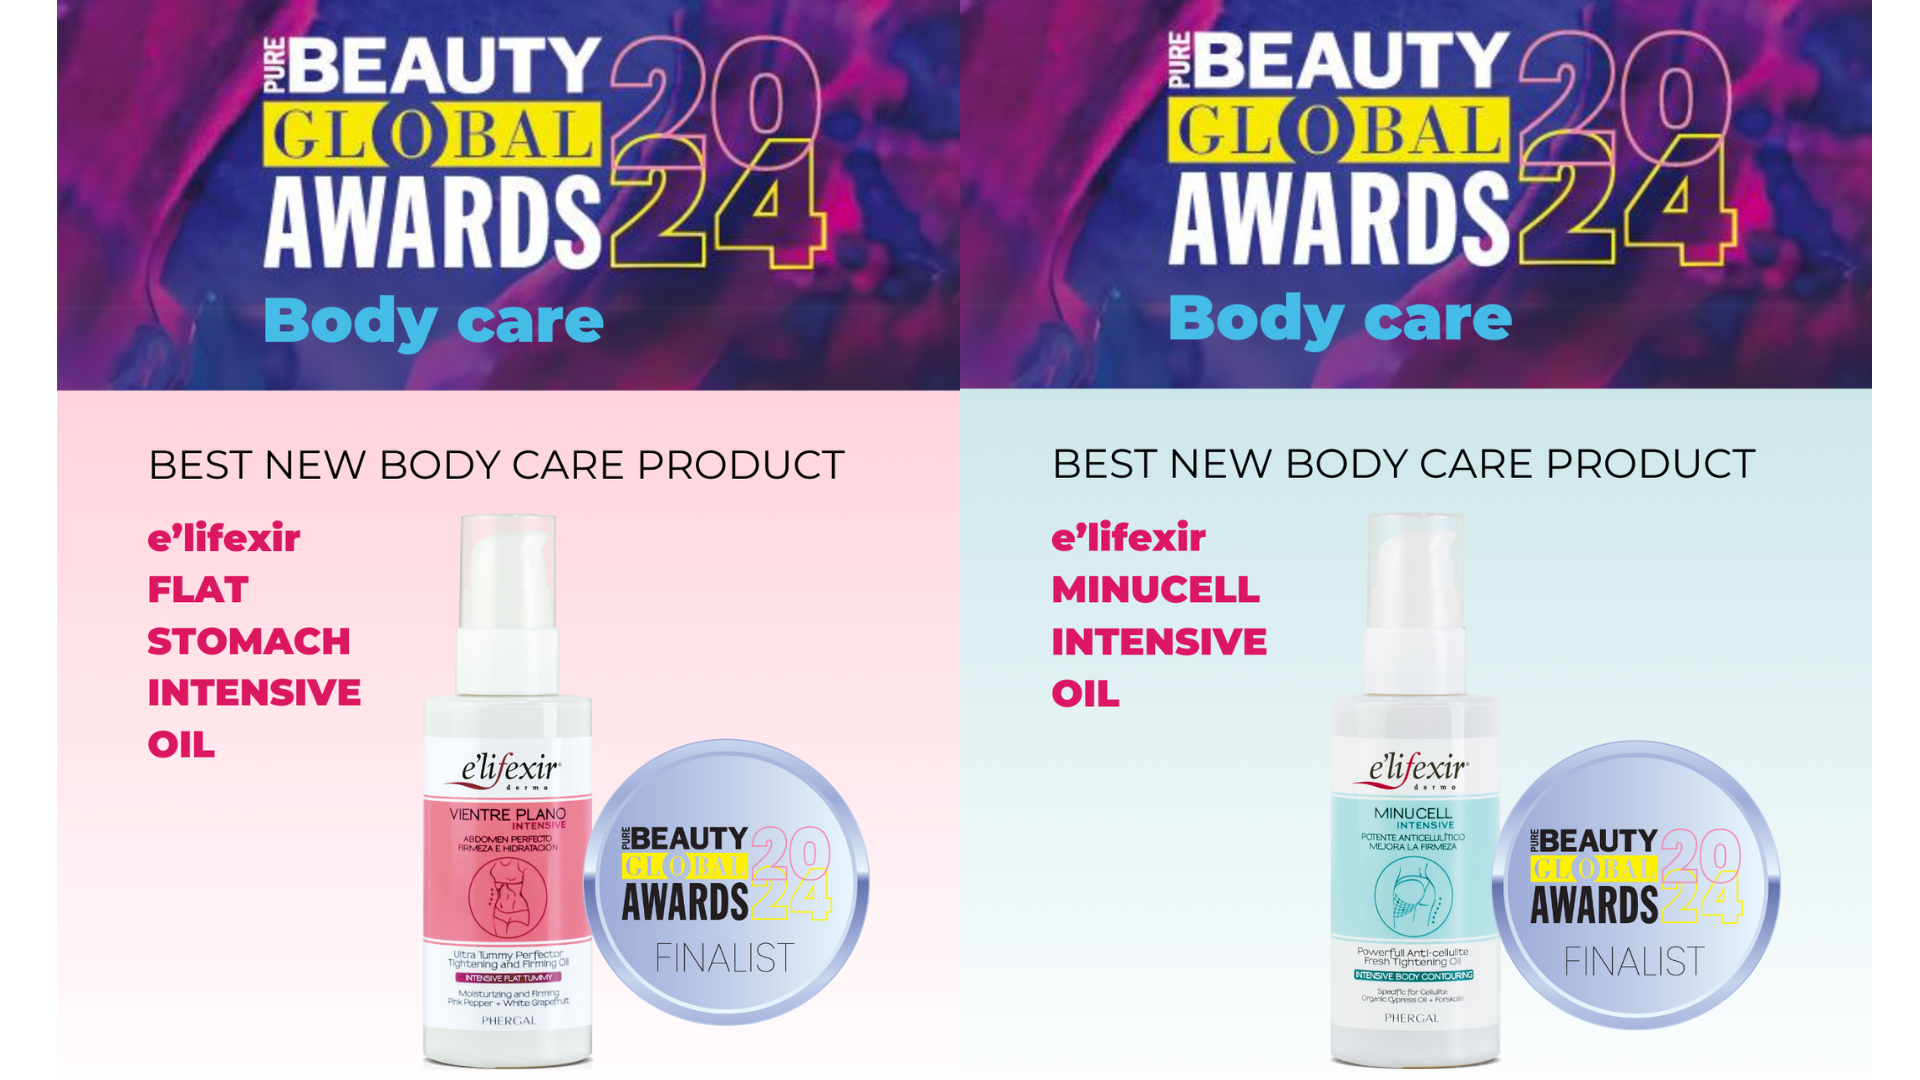 E’lifexir, finalist in the Best New Body Care Product Category